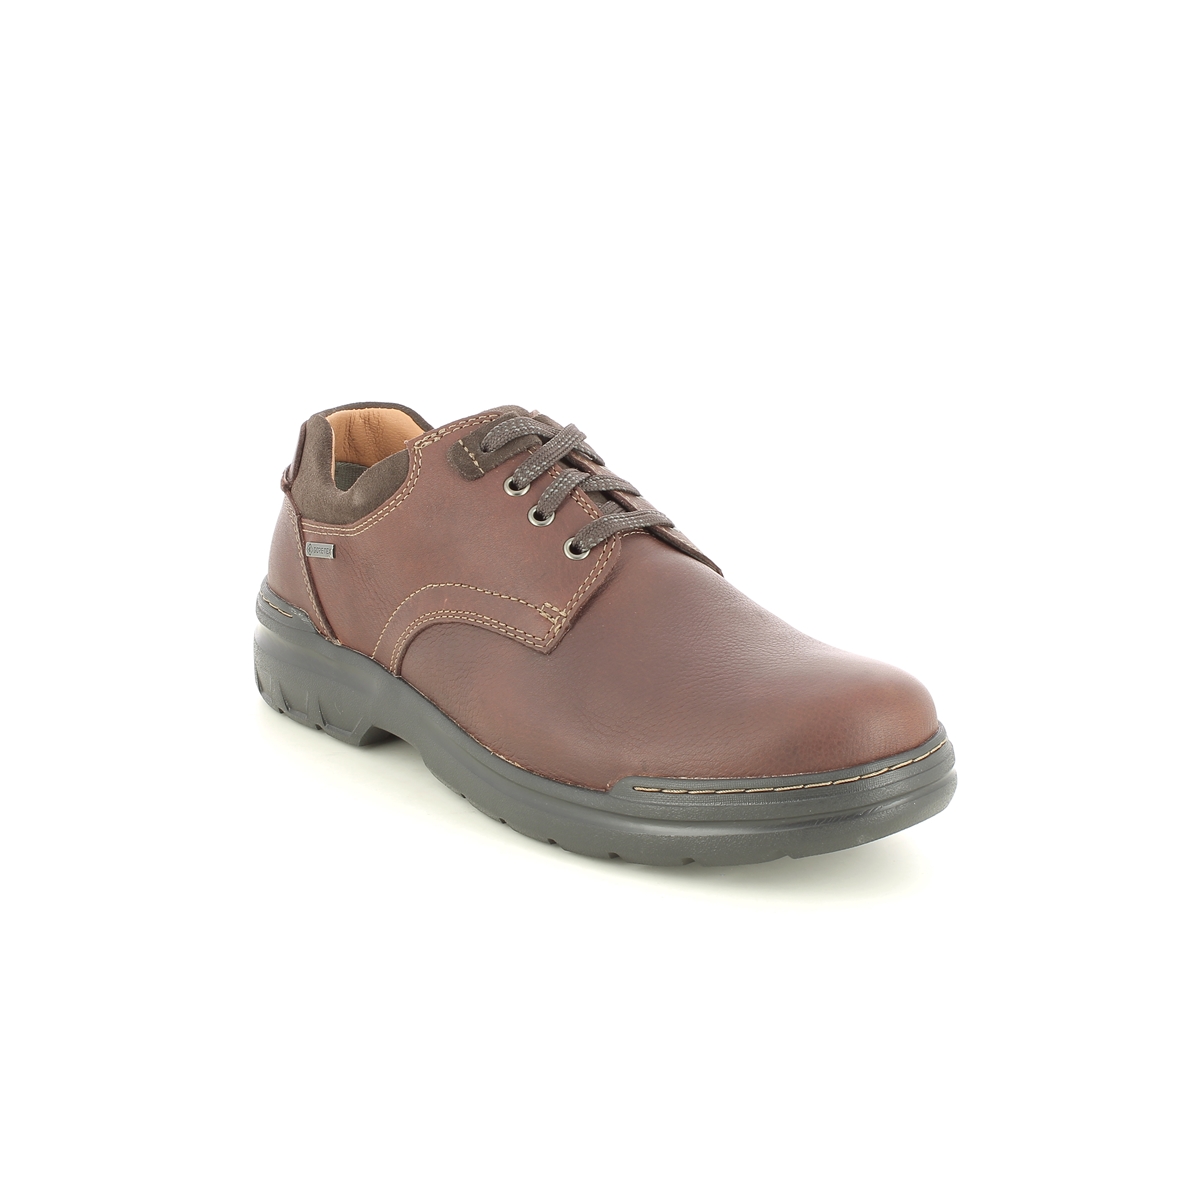 Clarks 2 Lo Gtx H Fit Brown casual shoes